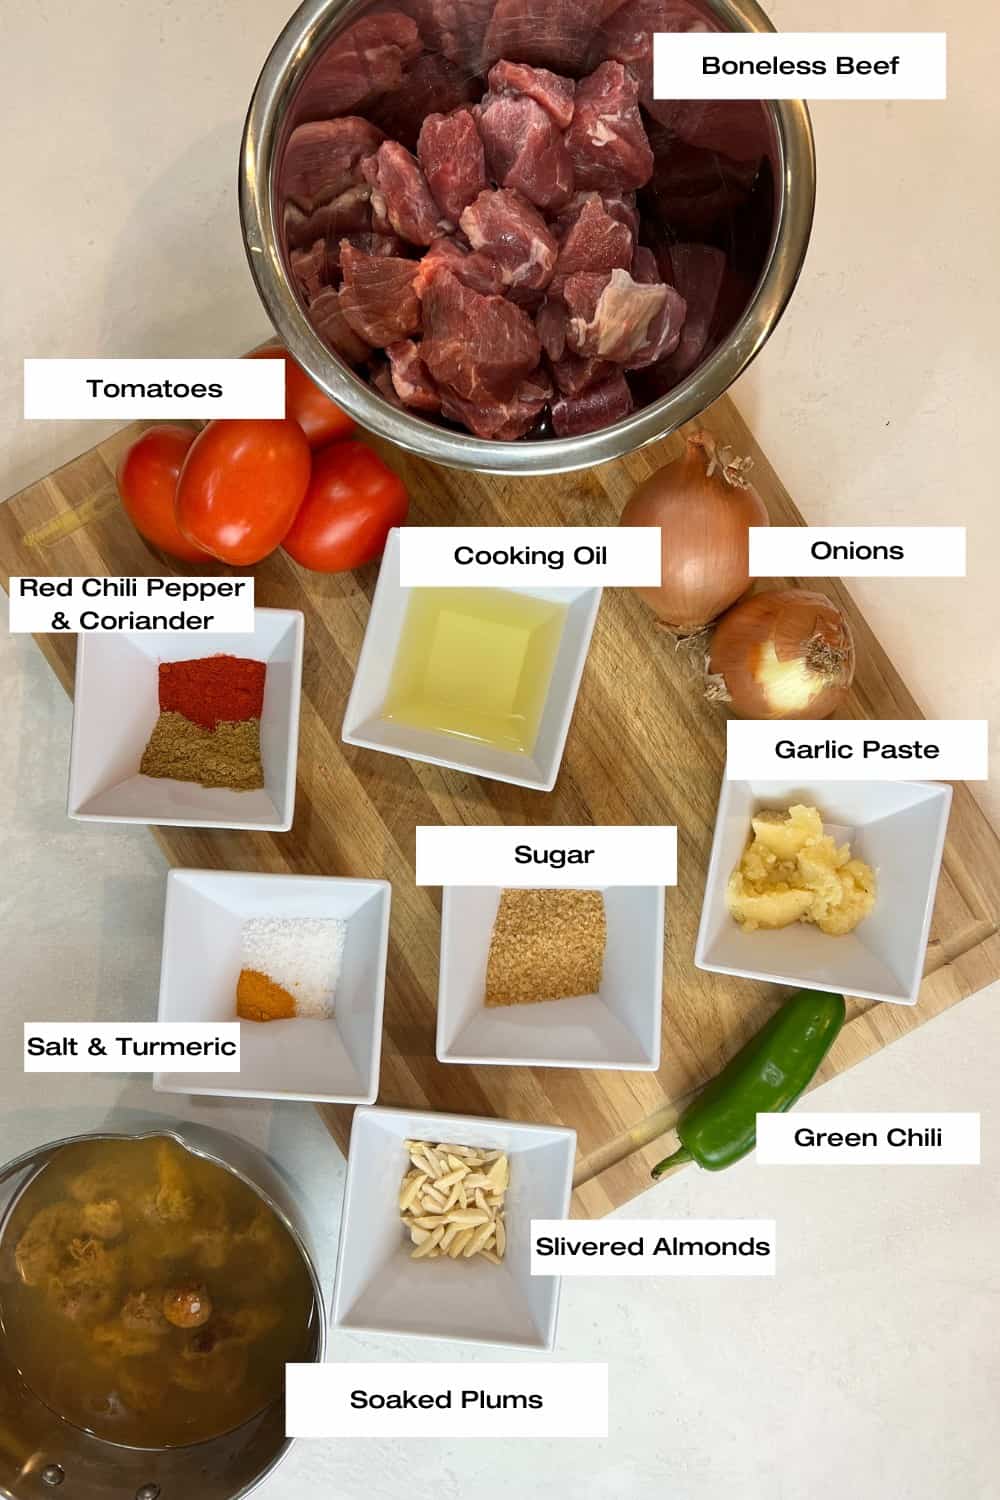 White counter with bowls filled with boneless beef, tomatoes, soaked plums, slivered almonds, sugar, cooking oil, assorted spices, onions, a green chili and garlic paste.